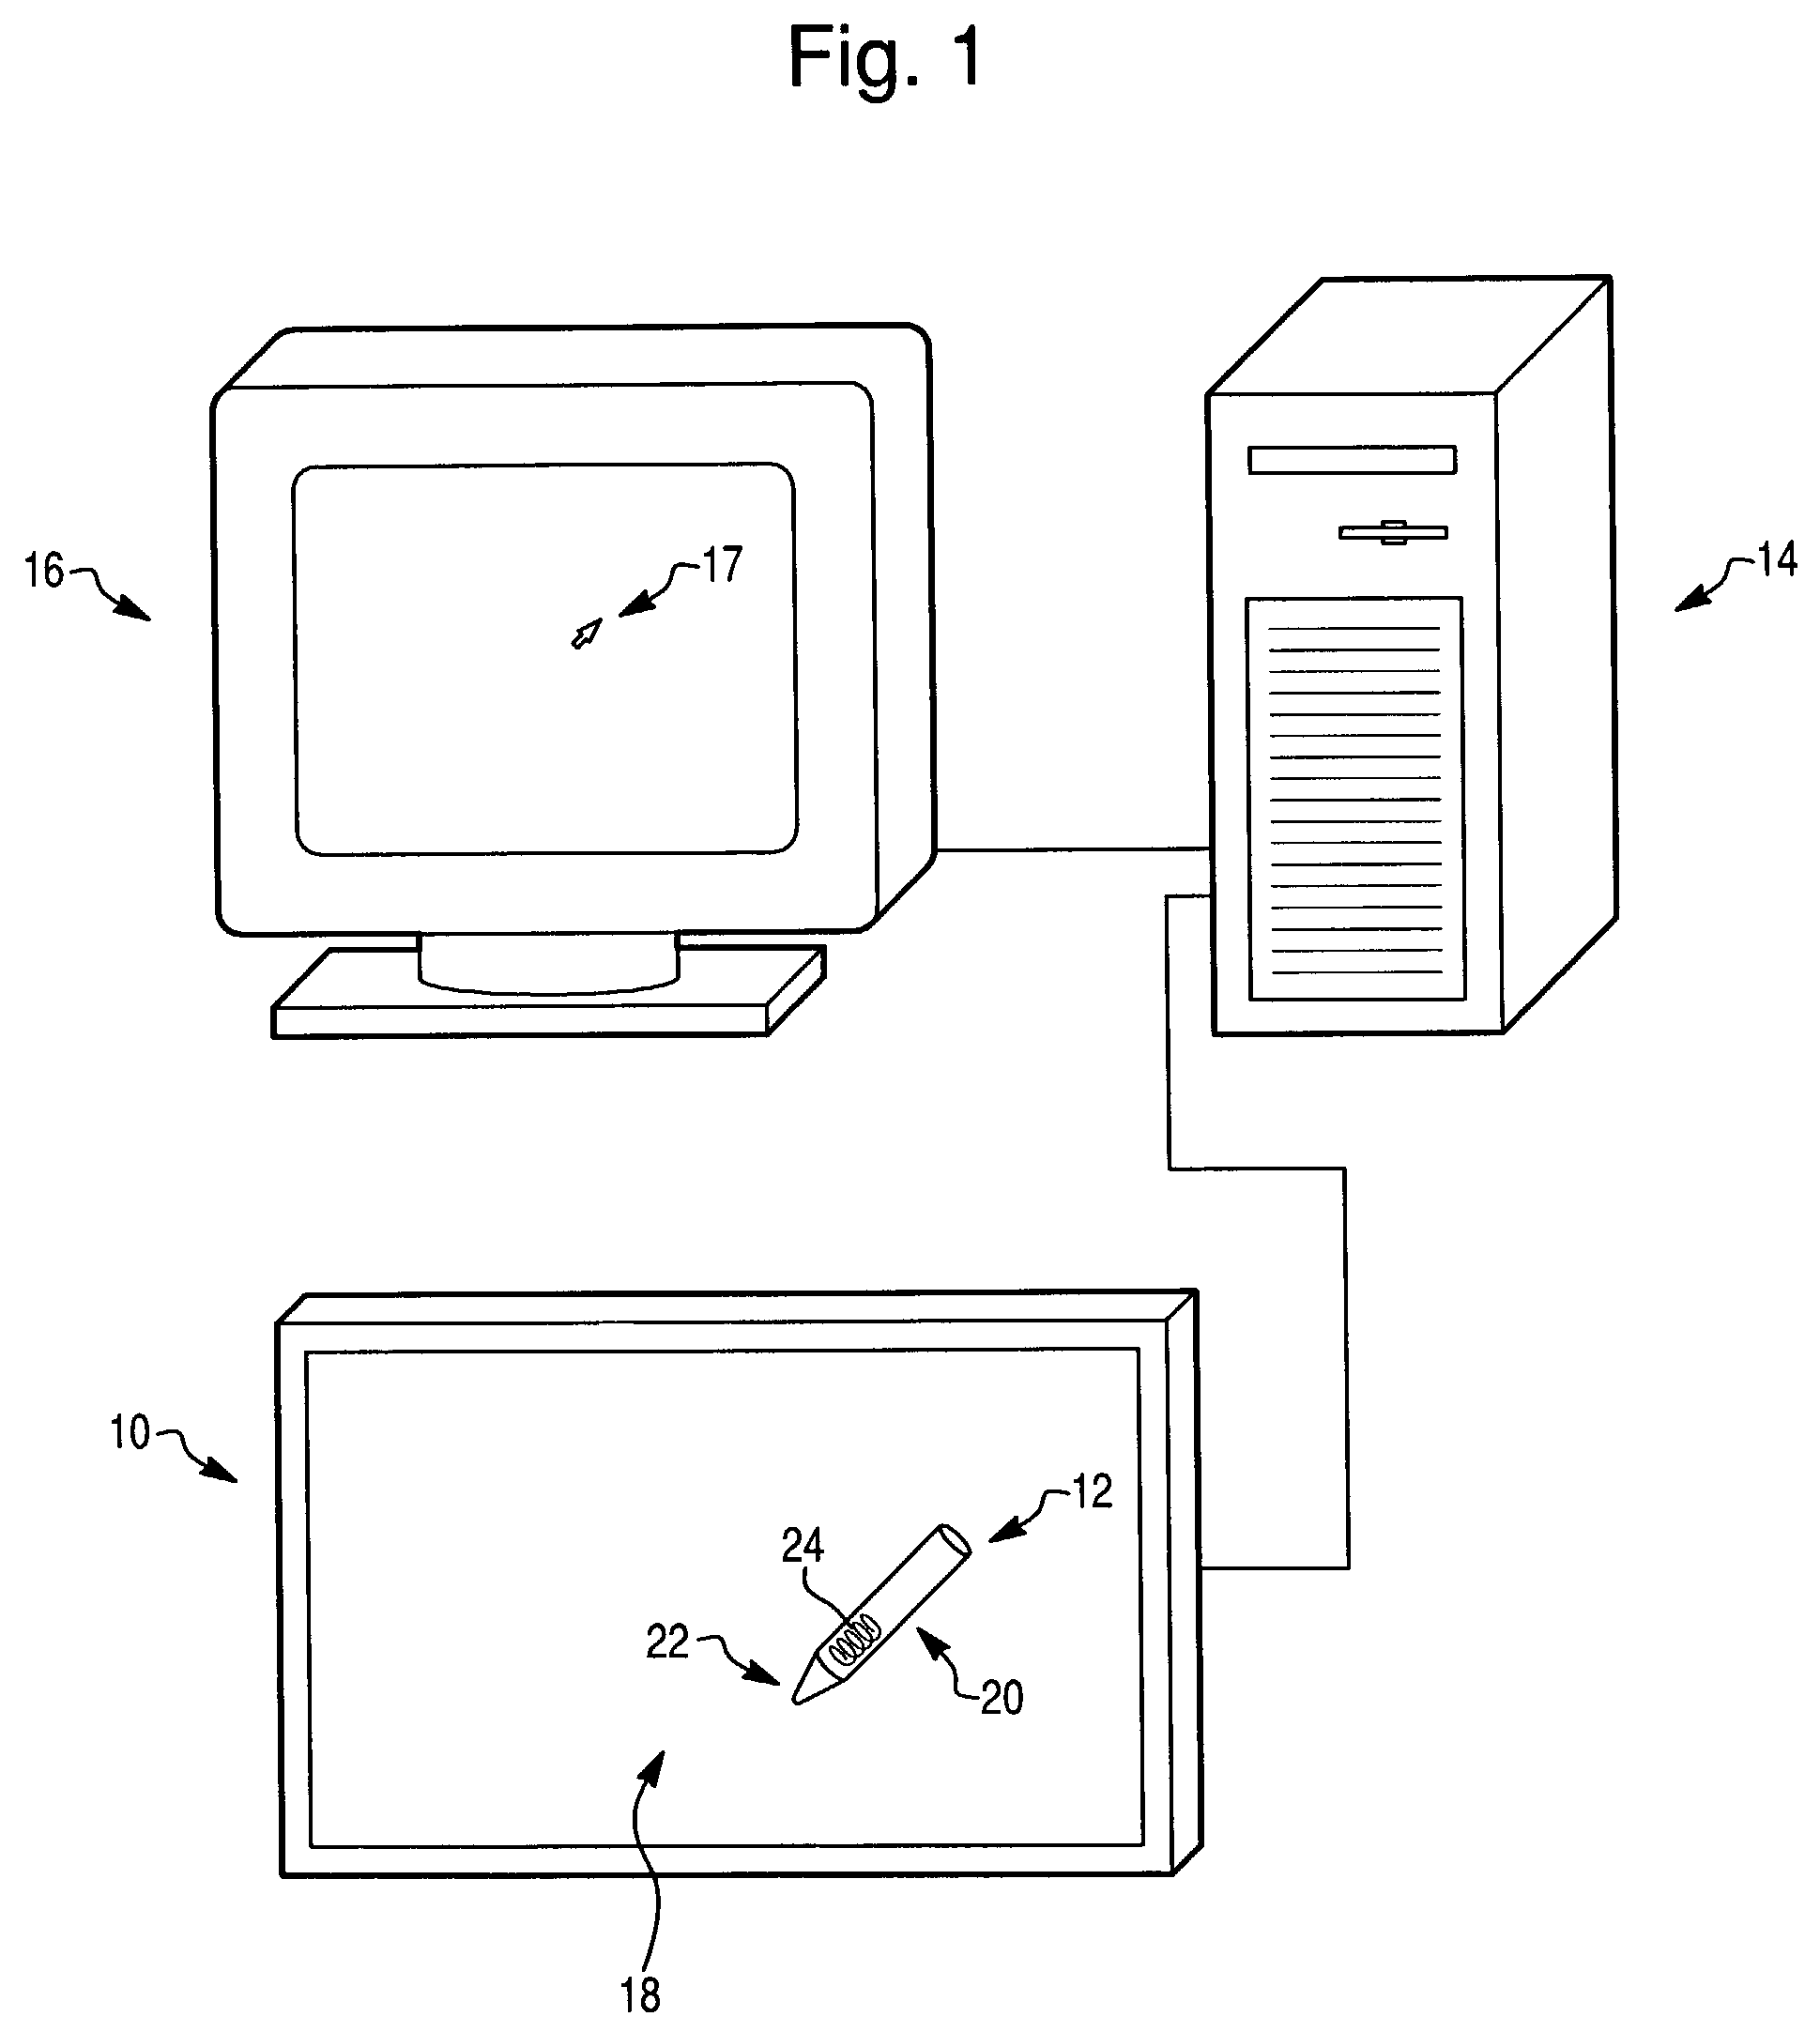 Method of triggering functions in a computer application using a digitizer having a stylus and a digitizer system